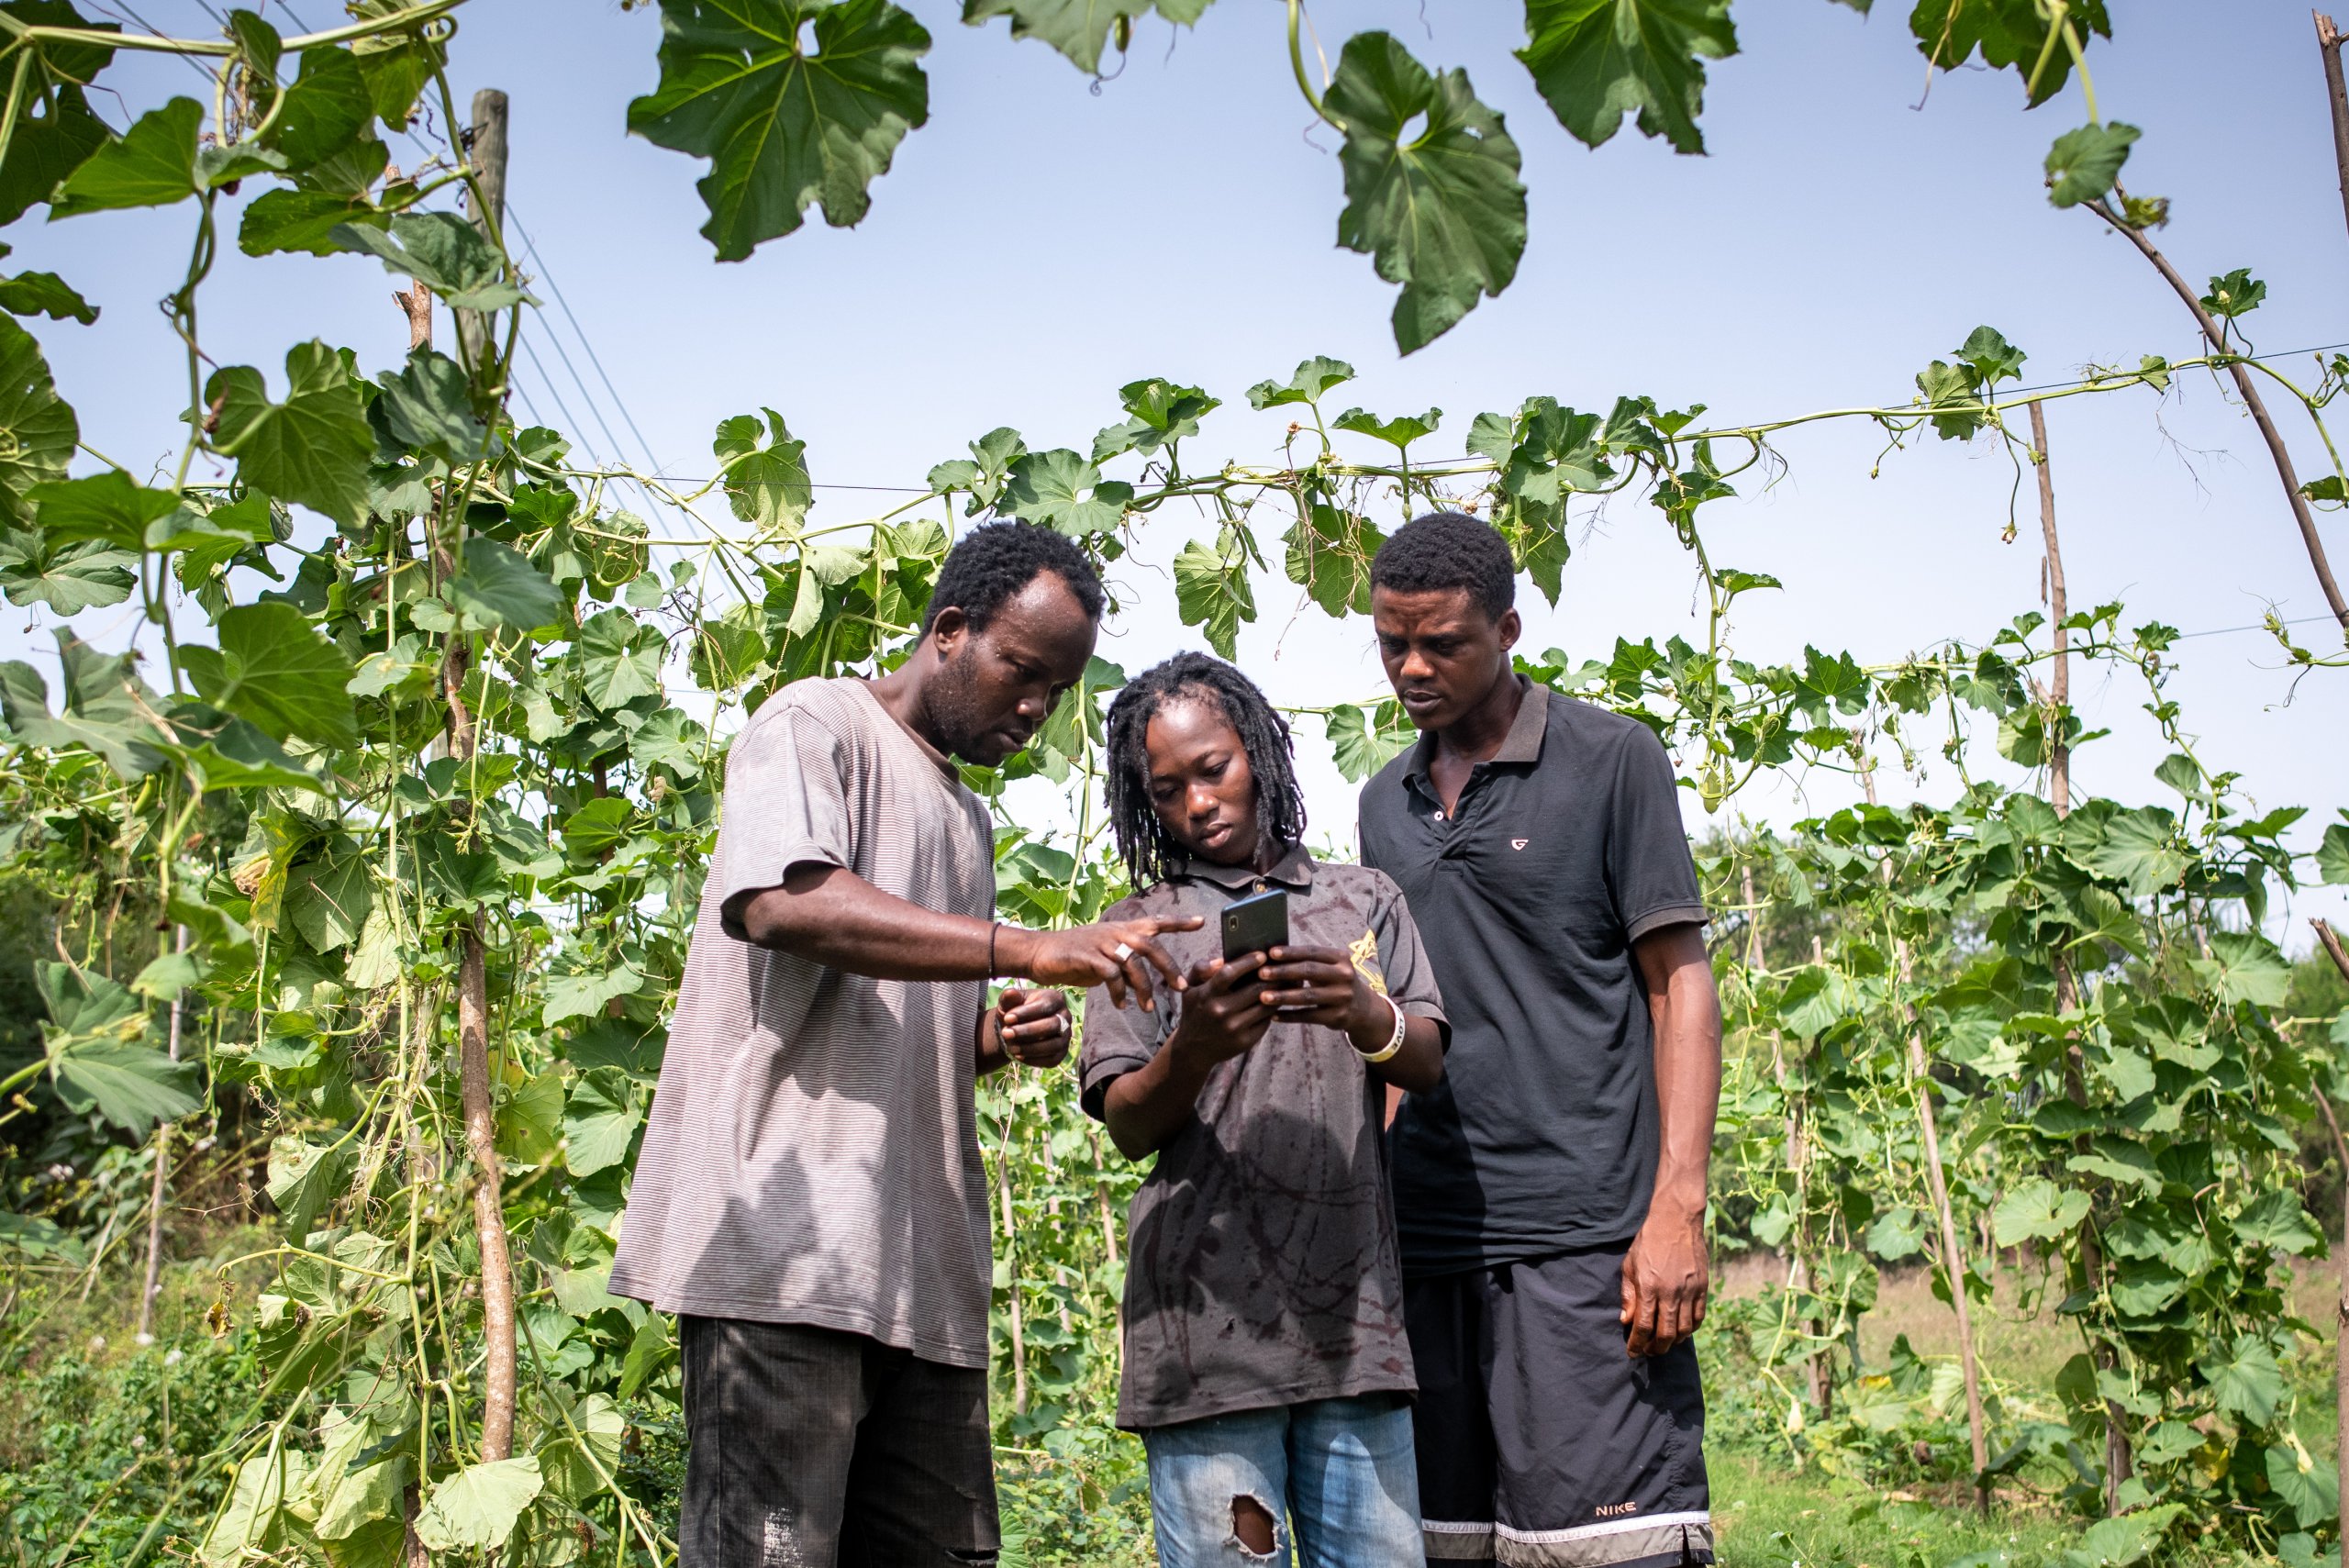 Three individuals examining a smartphone in a garden with vine plants.